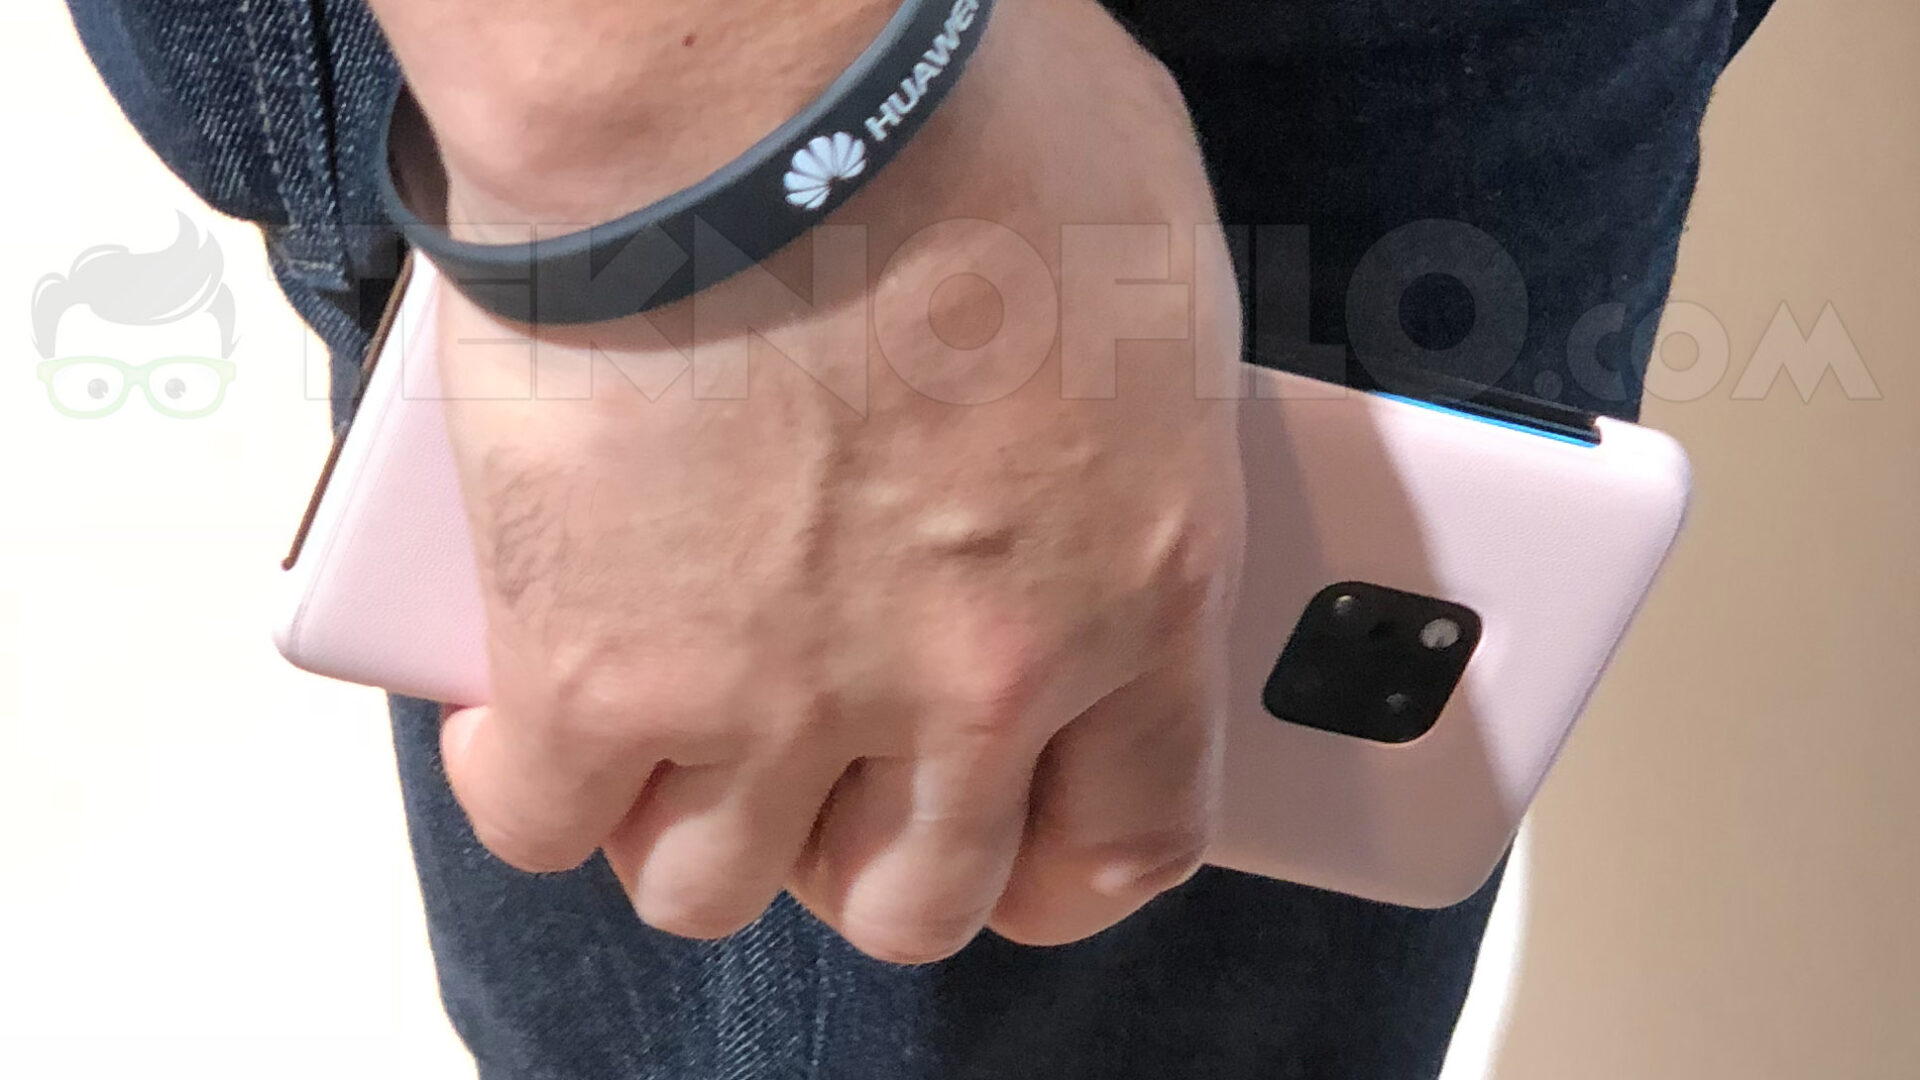 Caught in the act: Not yet released Huawei Mate 20 spotted at IFA Berlin